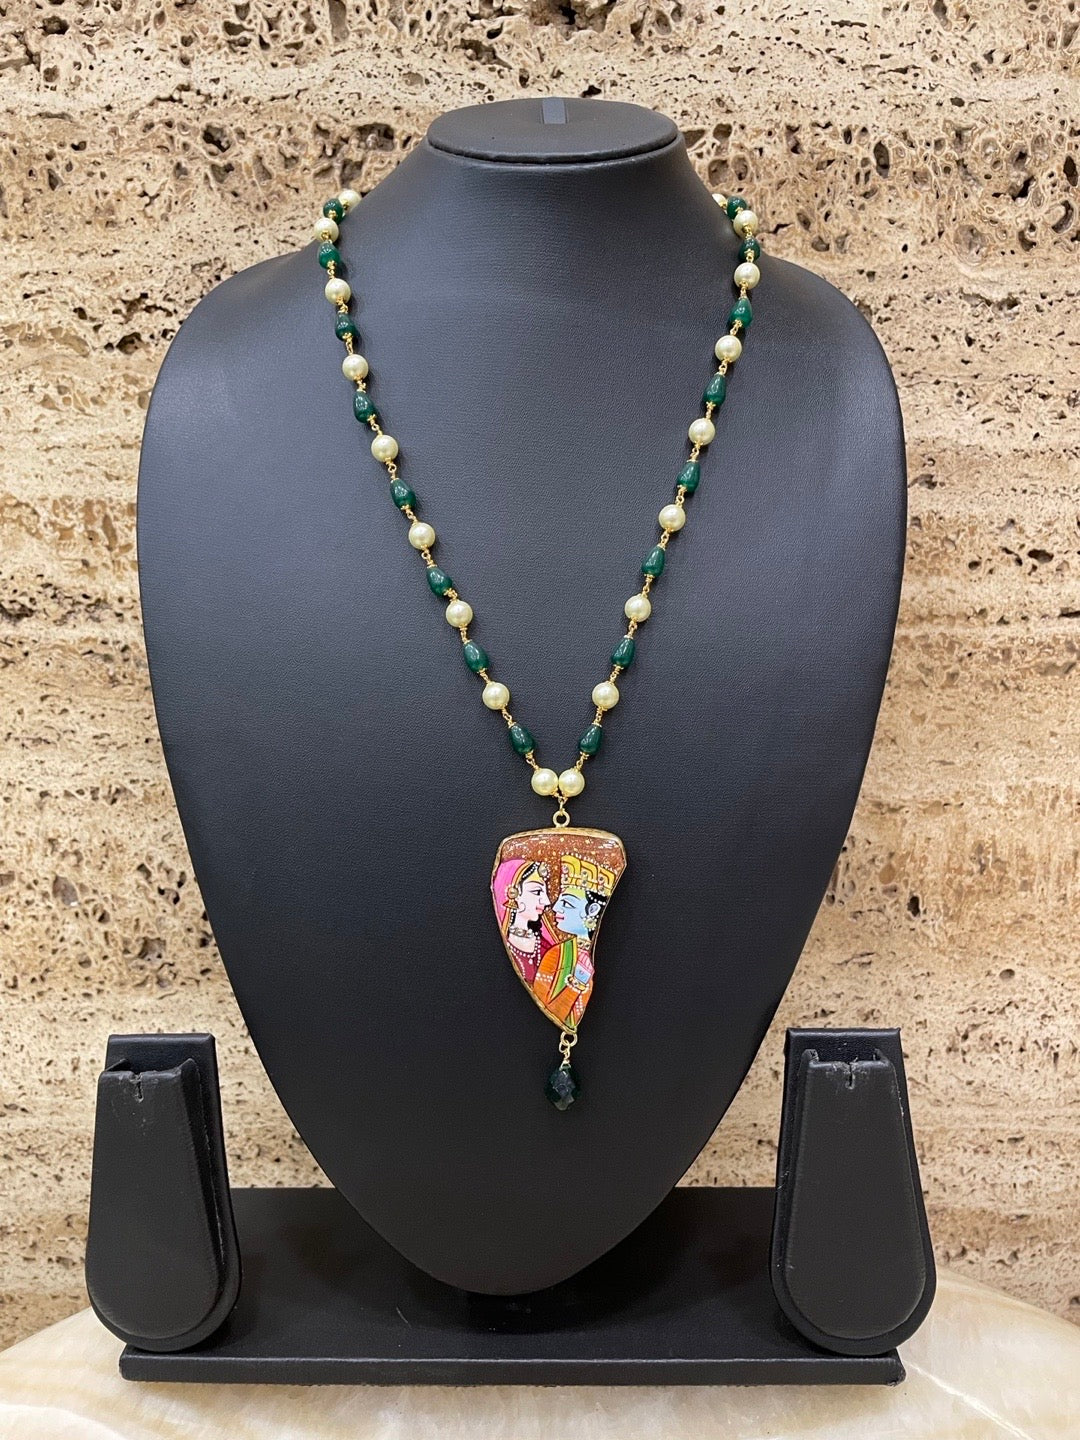 Unique Hand-Painted Radha Krishna Pendant Necklace with Green Beads & White Pearls